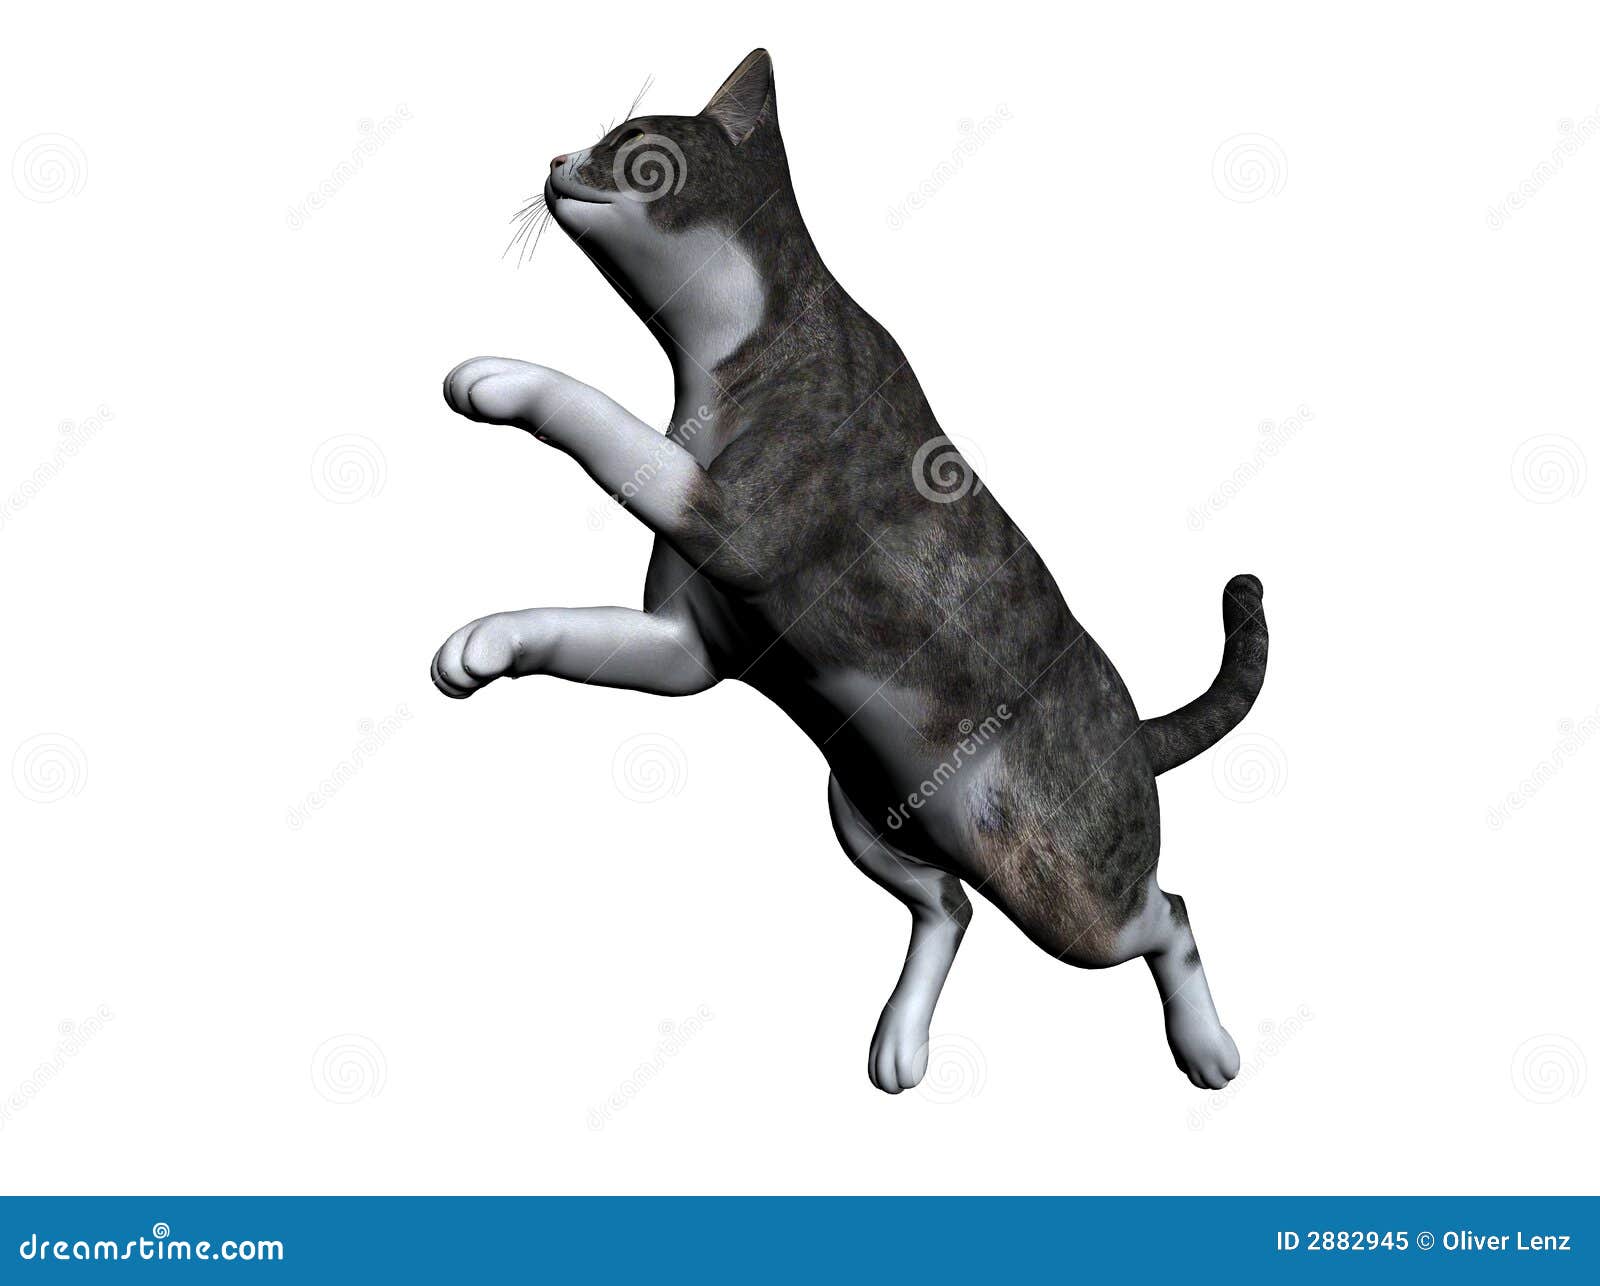 Three dimensional cat illustration. Isolated against a white 